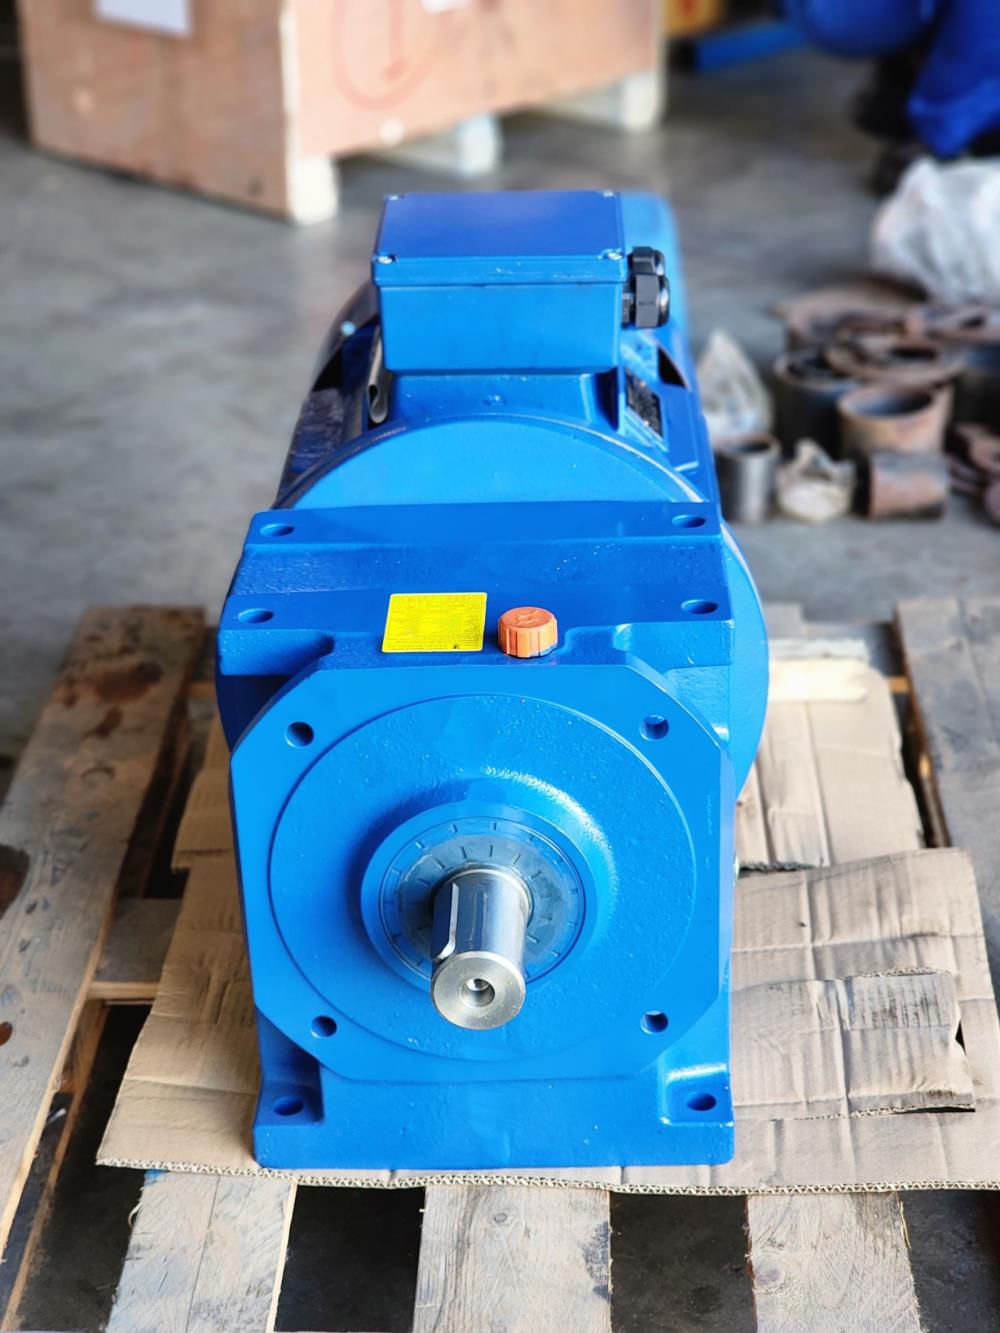 “ROSSI”-HELICAL GEAR MOTOR MR 2I 100 UC2A Ratio : 15